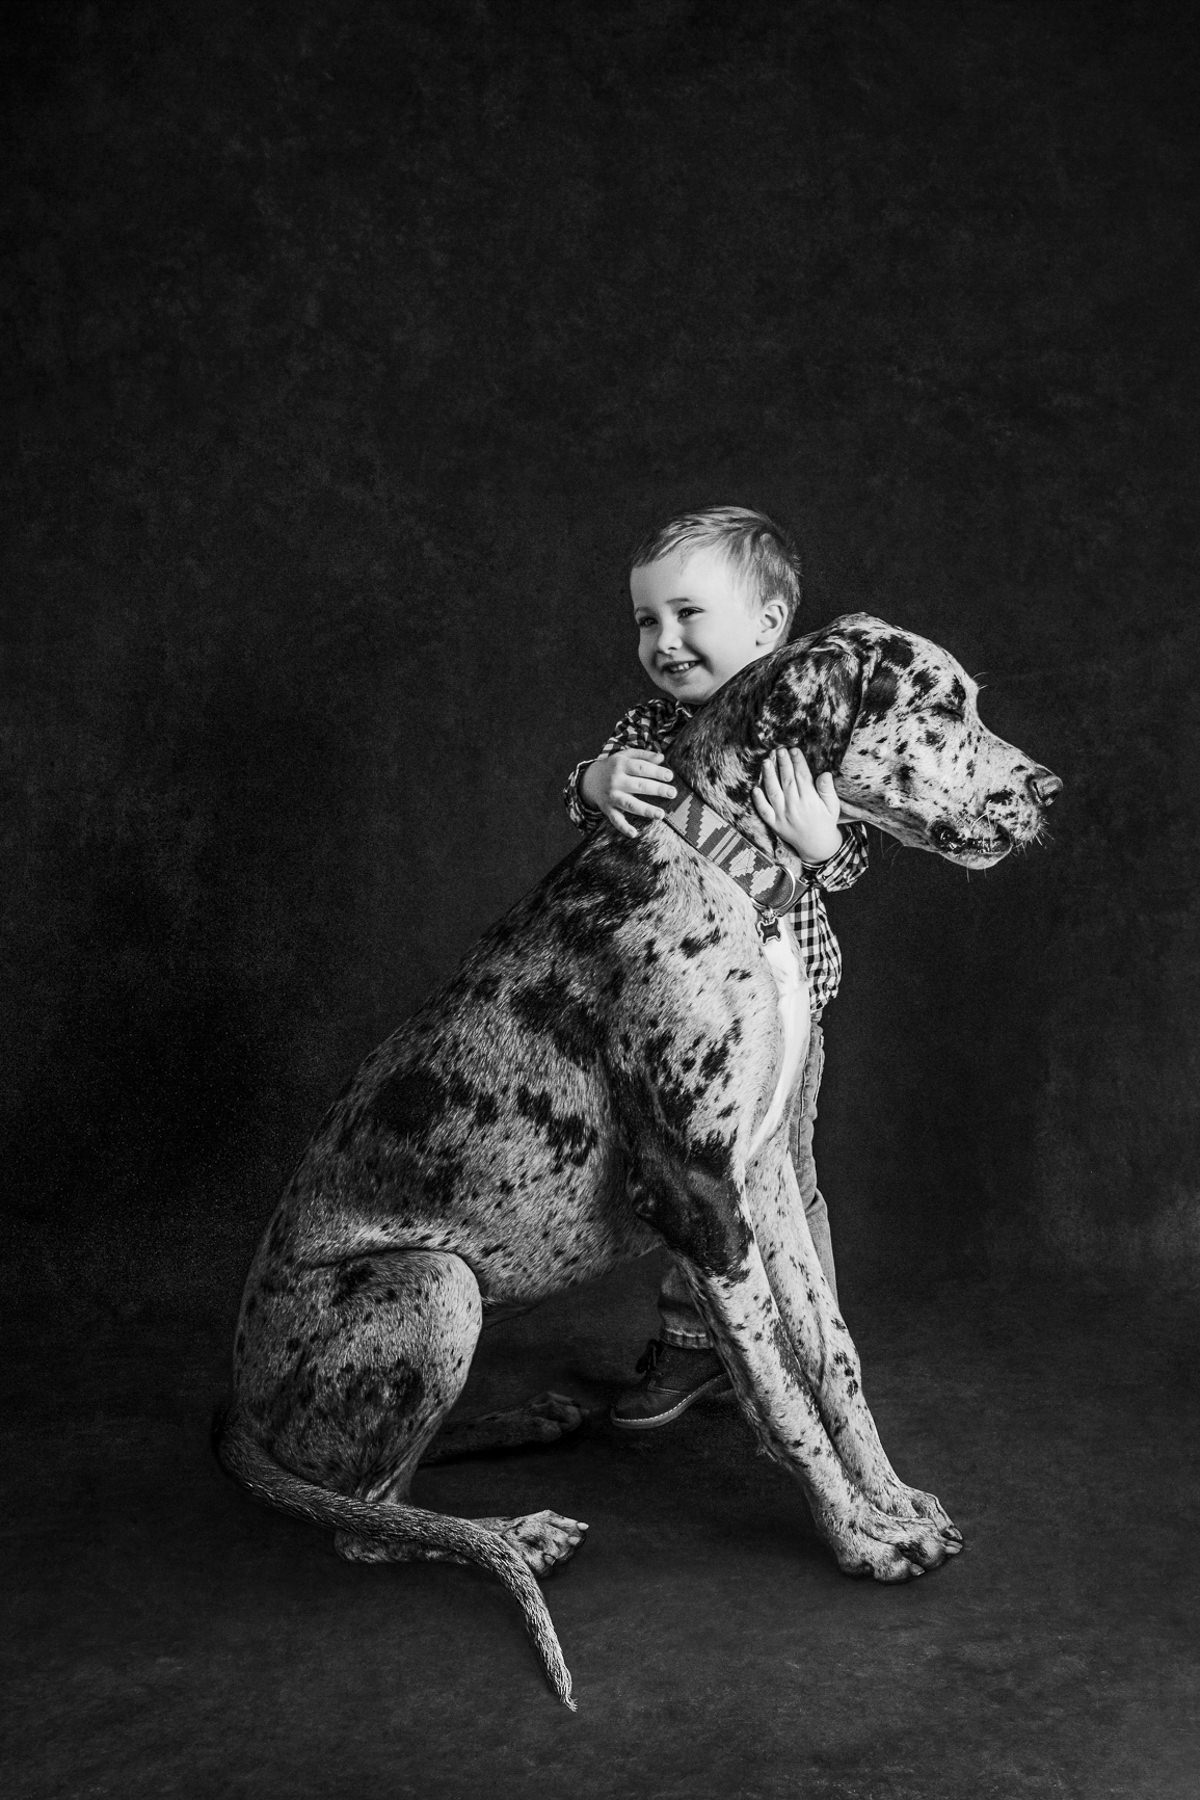 Dog with child. Dog photography in Austin, Texas